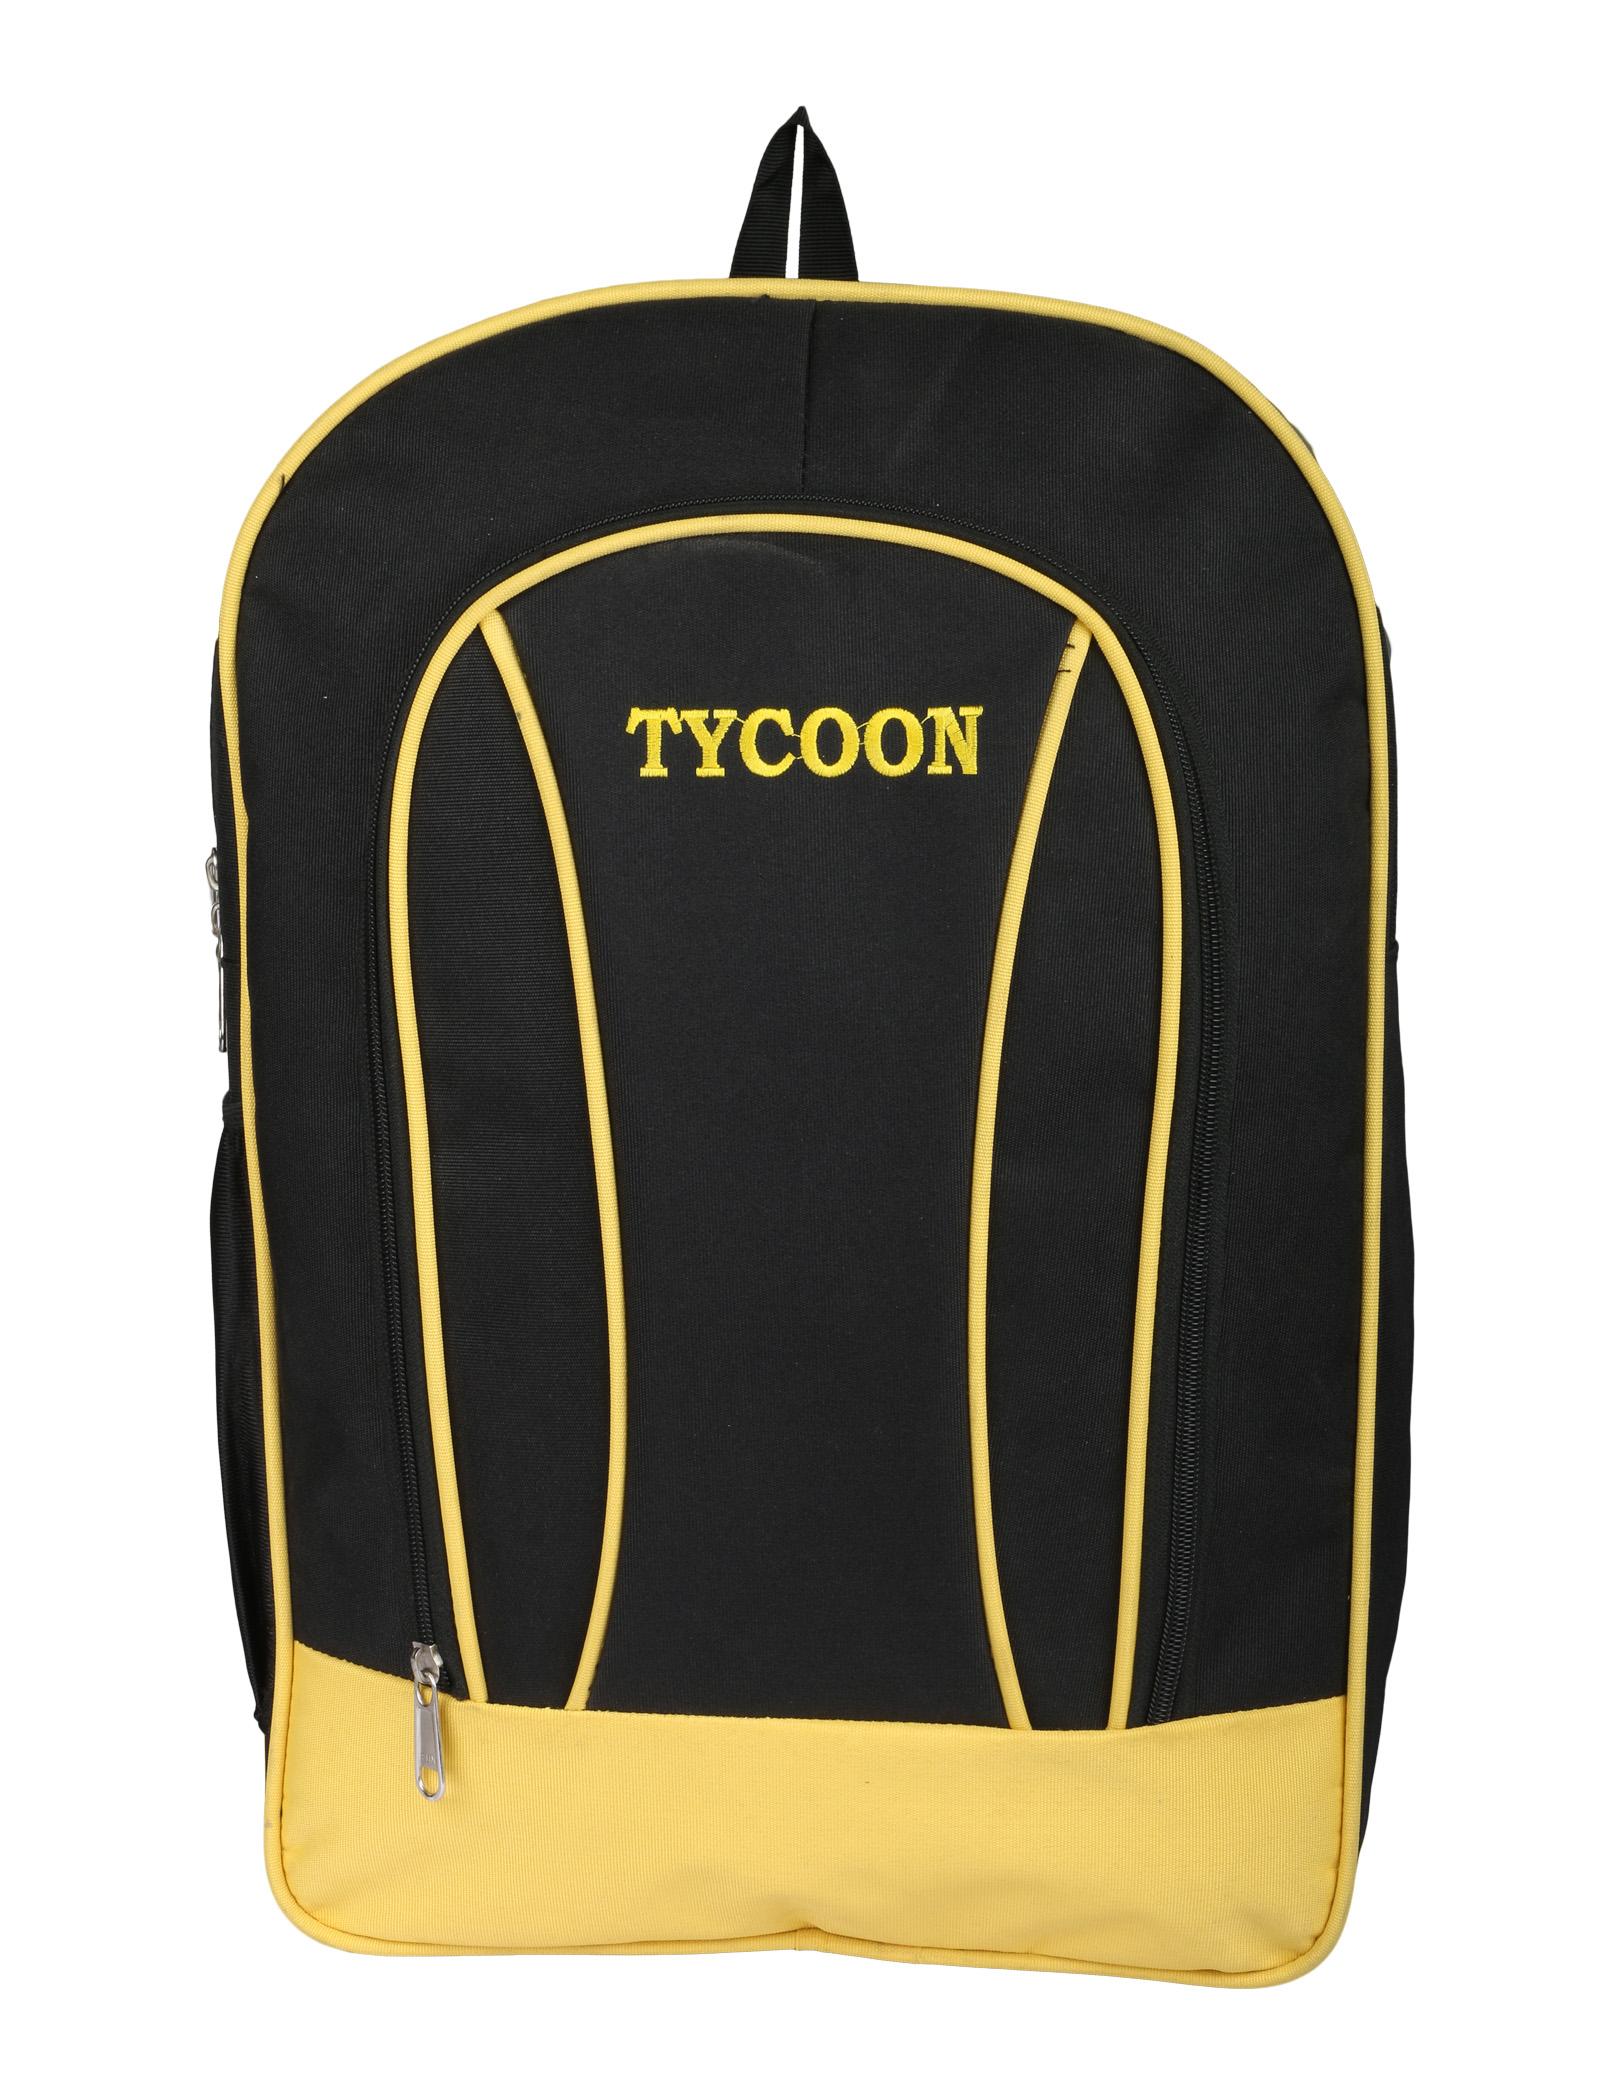 Black and Yellow Hand Logo - Black & Yellow Economical Laptop Backpack - Logo Bags